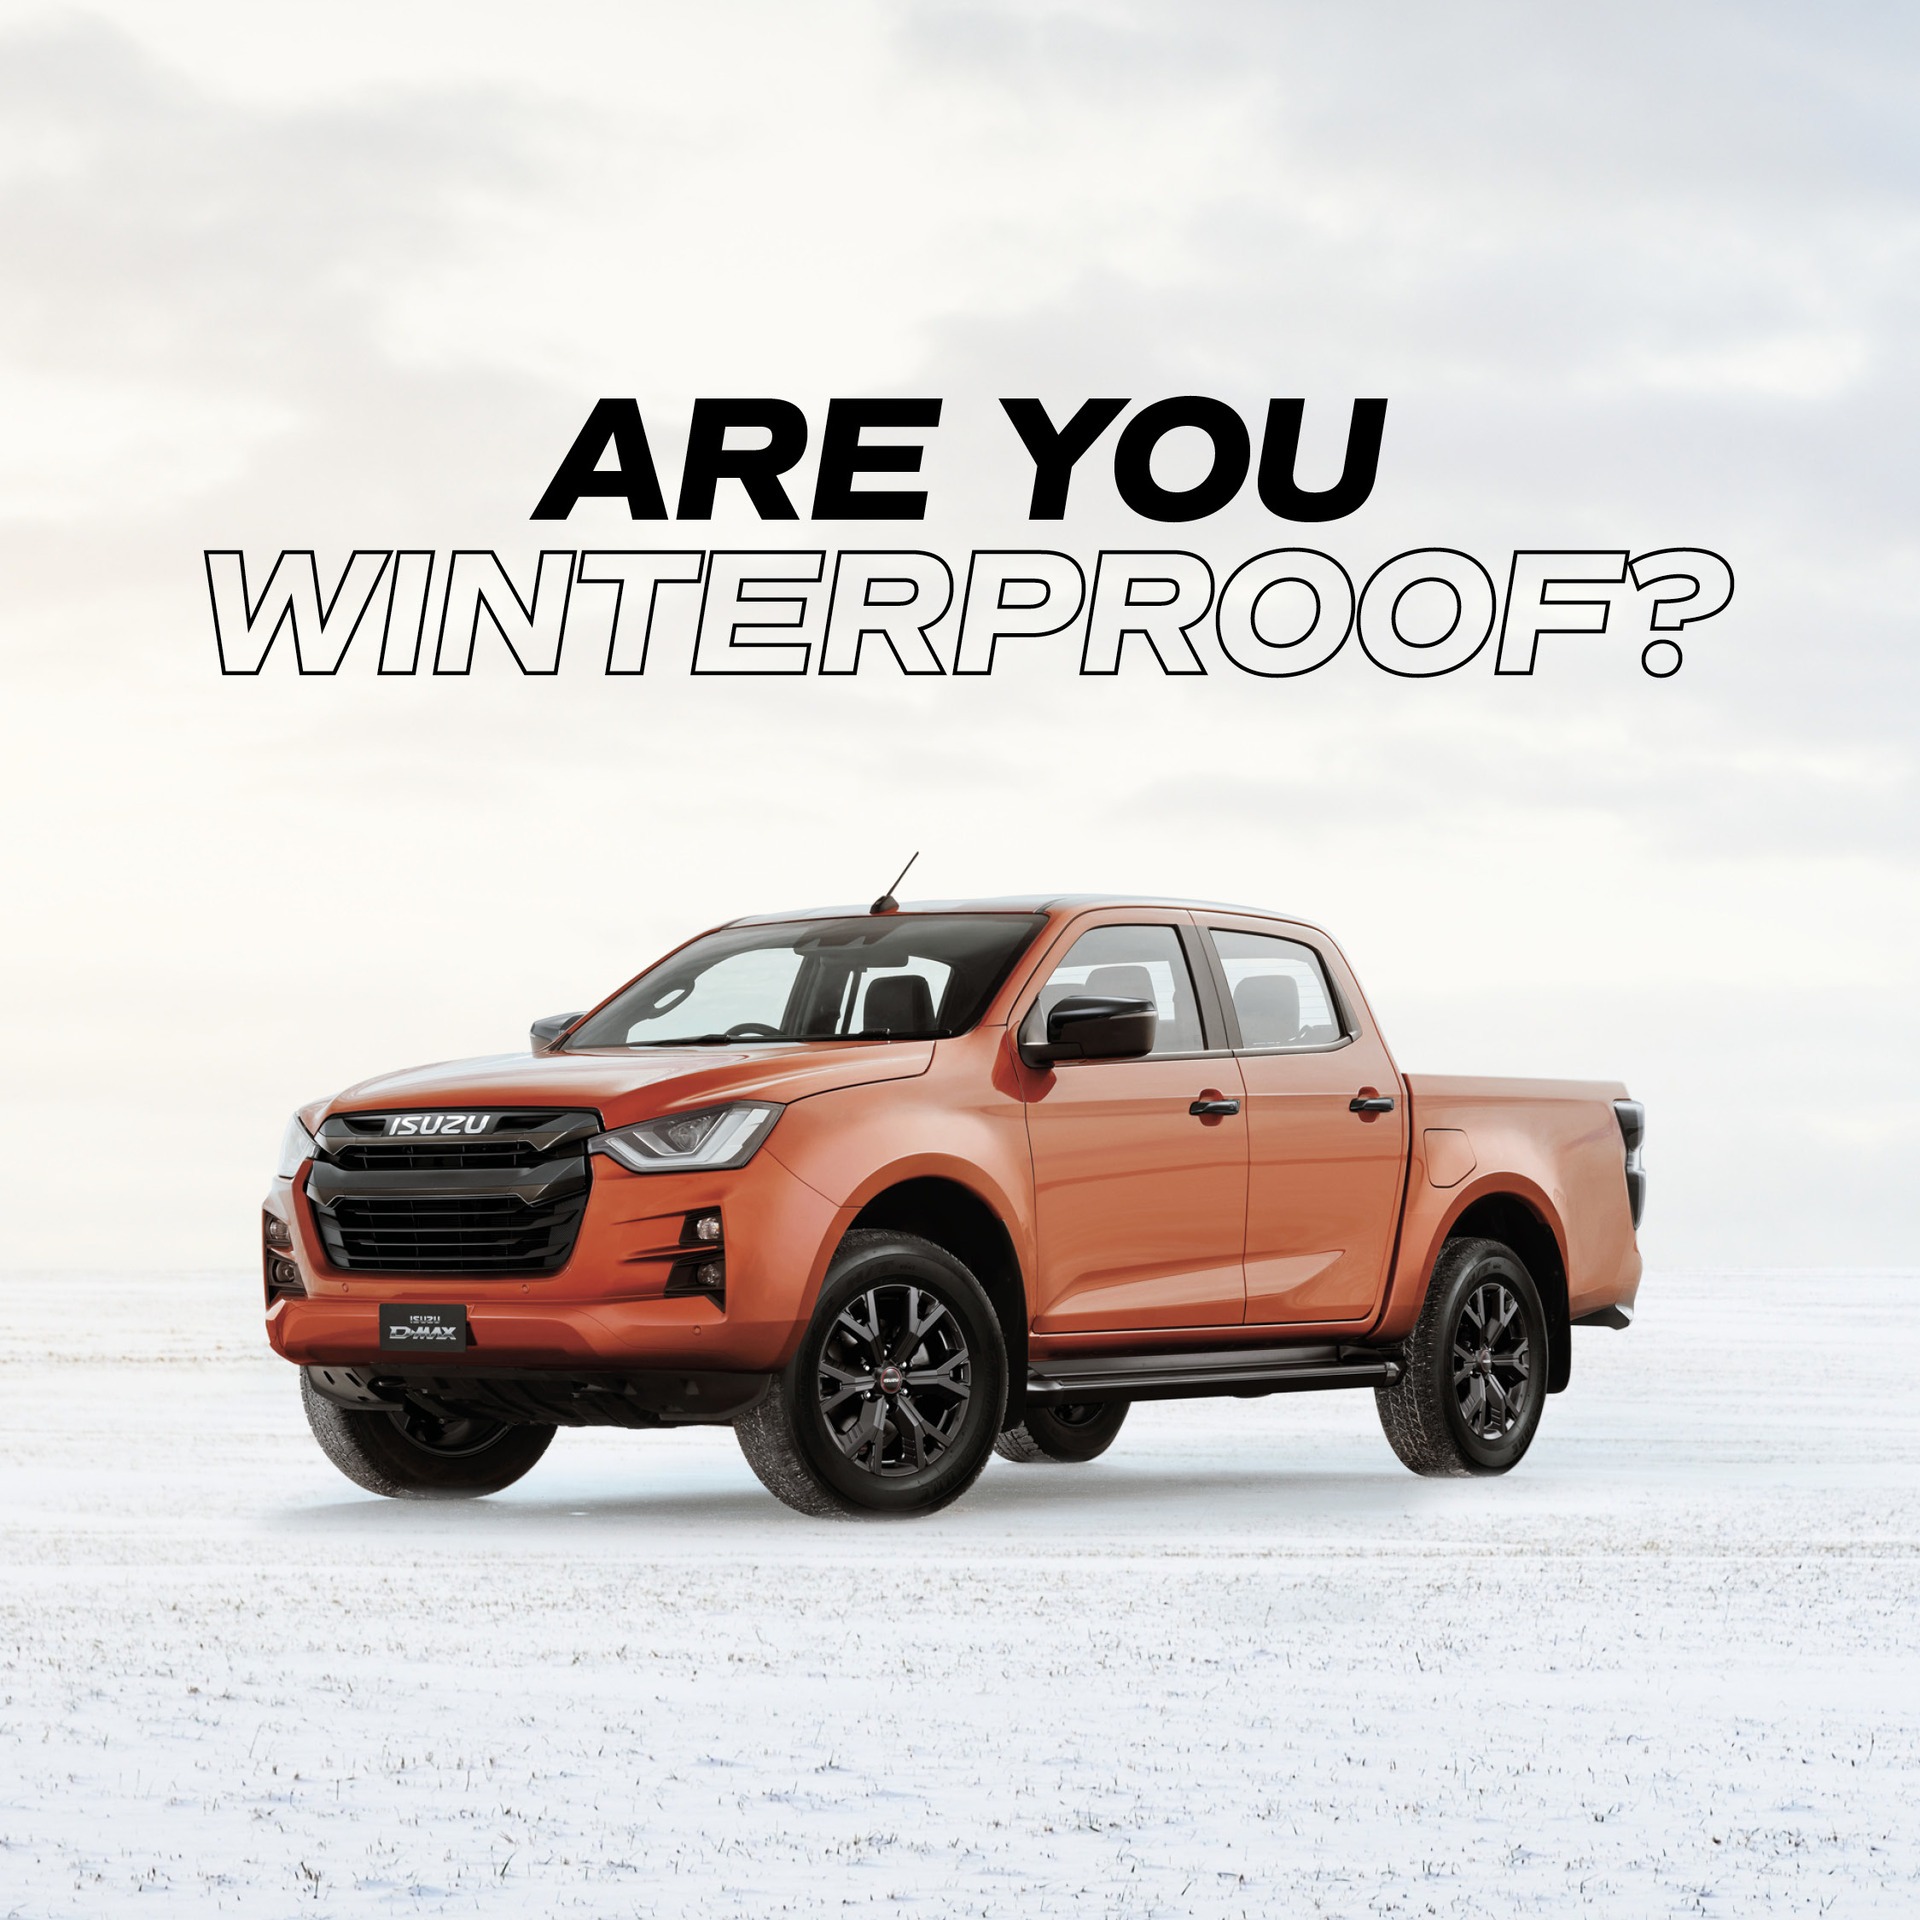 ARE YOU WINTERPROOF?